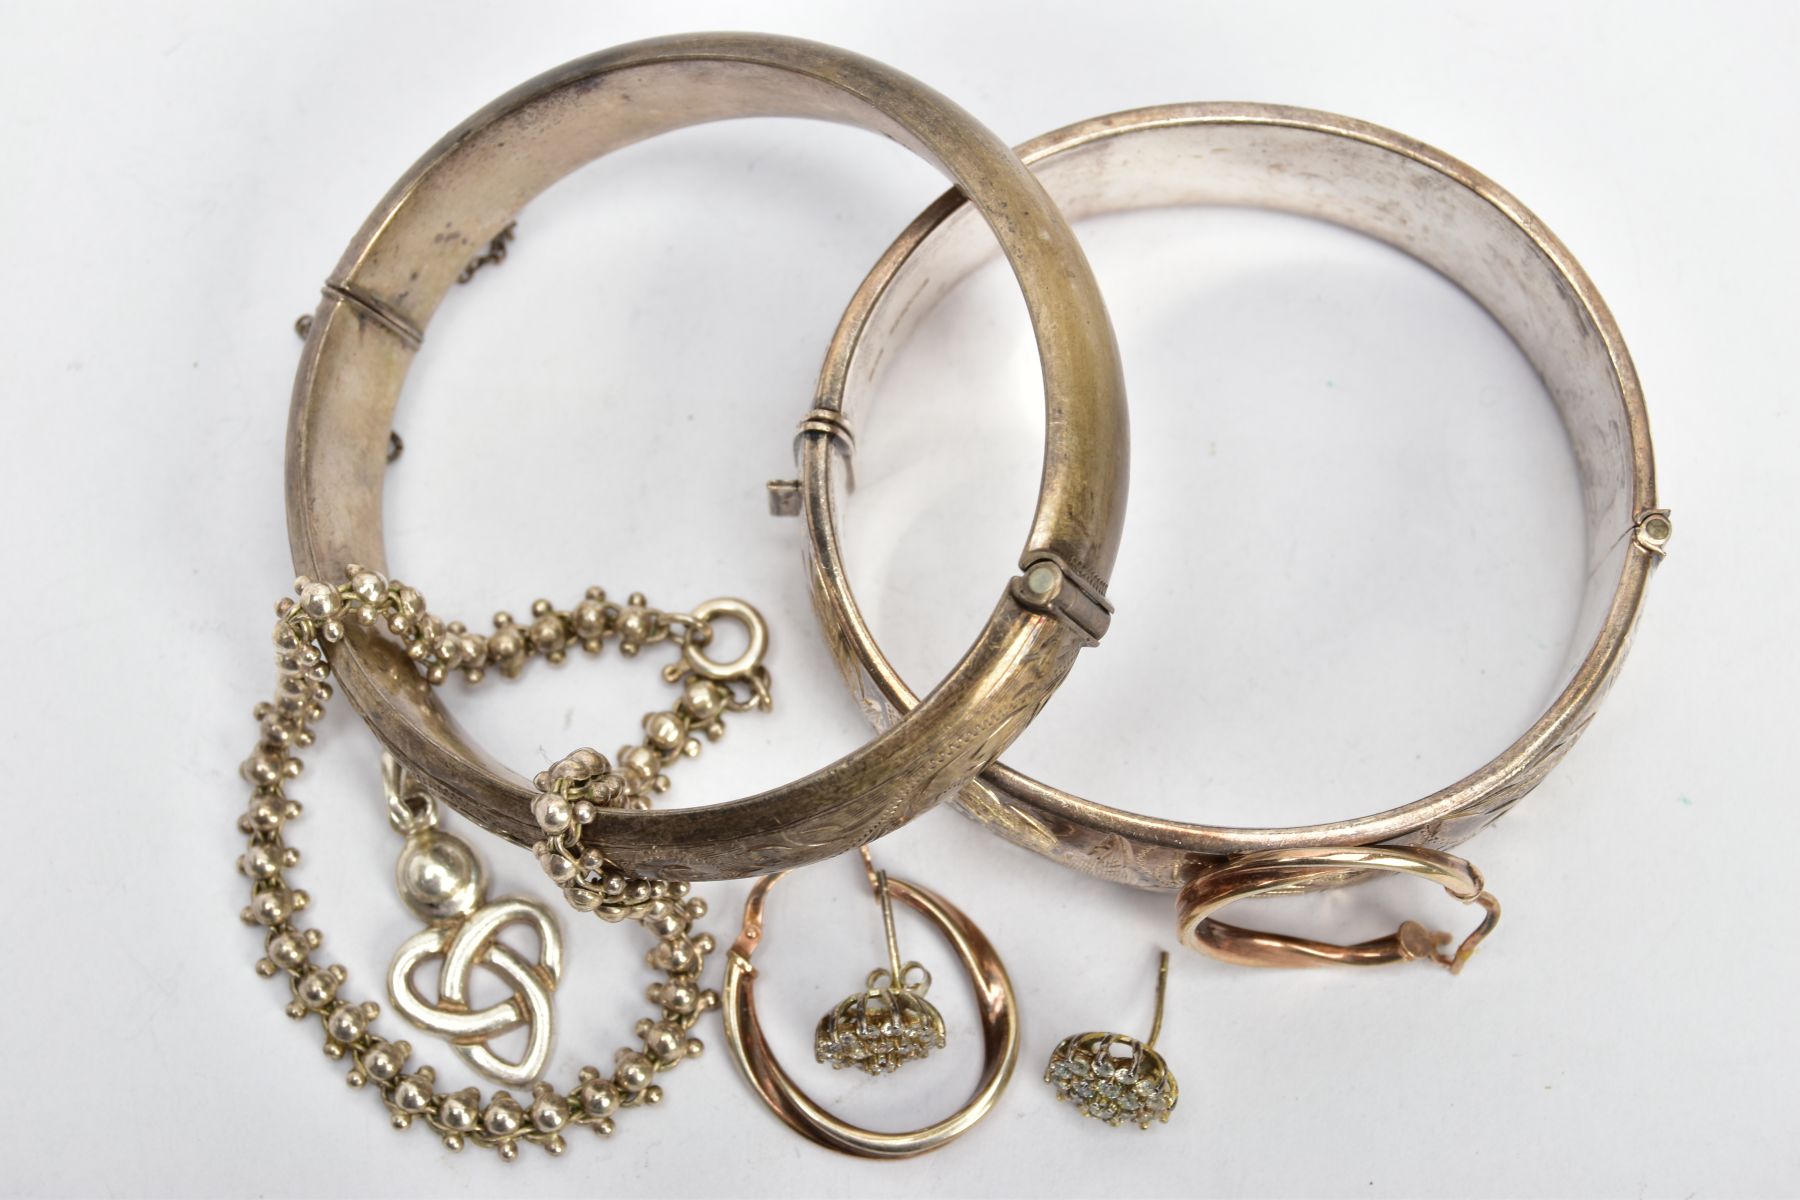 TWO SILVER BANGLES, EARRINGS AND A BRACELET, to include a wide hinged bangle decorated with a floral - Image 3 of 3